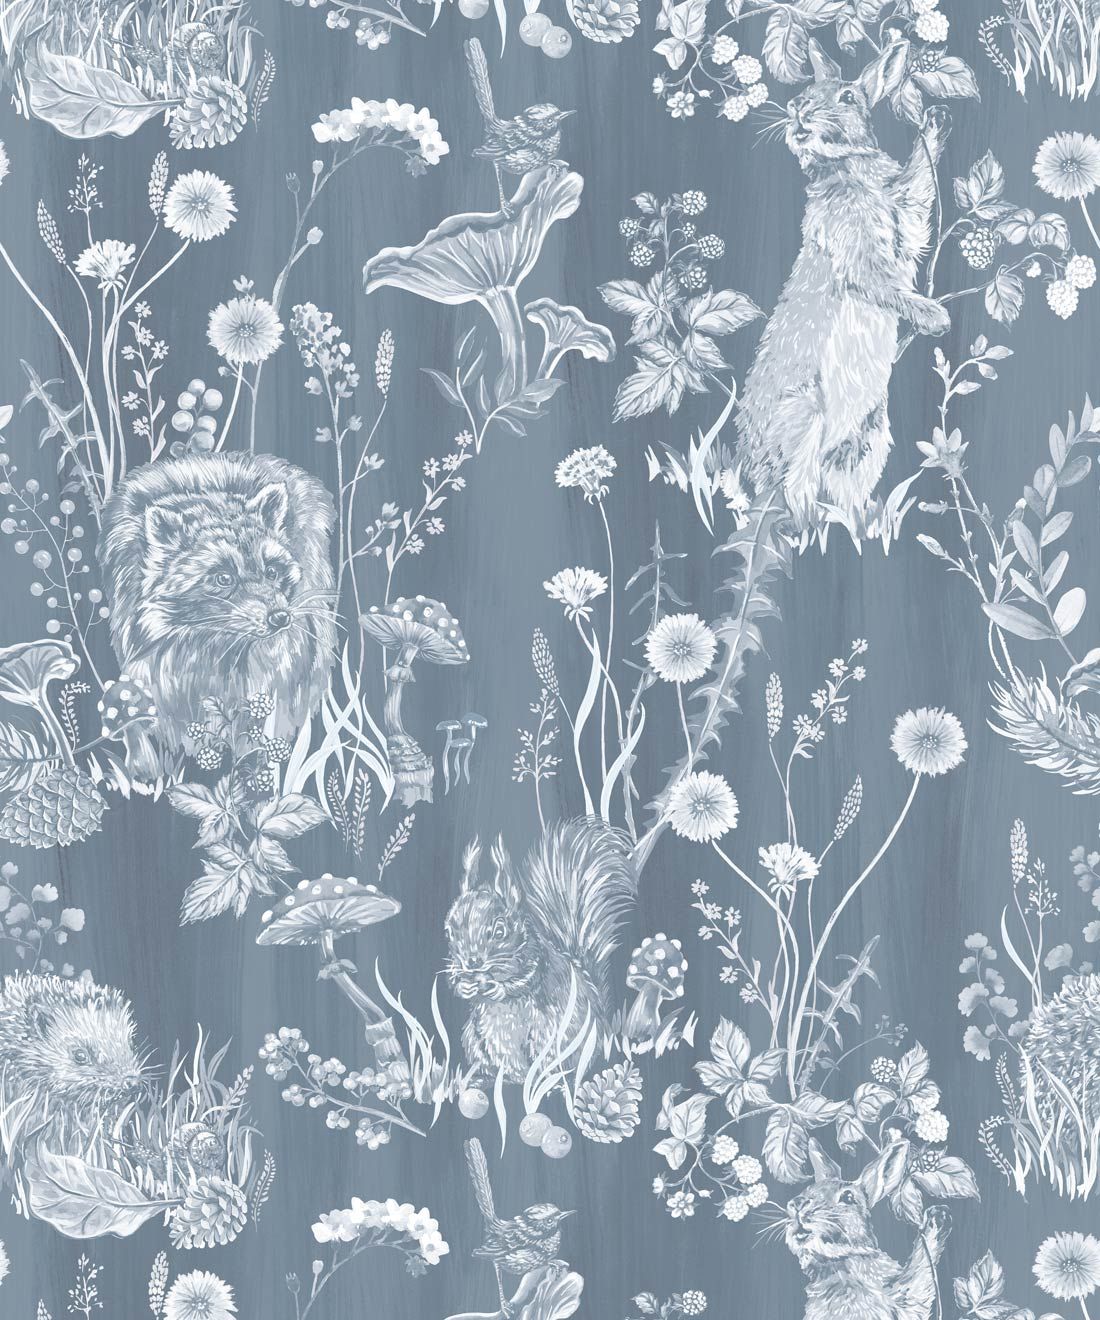 Woodland Friends Wallpaper • Forest Wallpaper with rabbits, hares, raccoons • Iryna Ruggeri • Arctic • Swatch